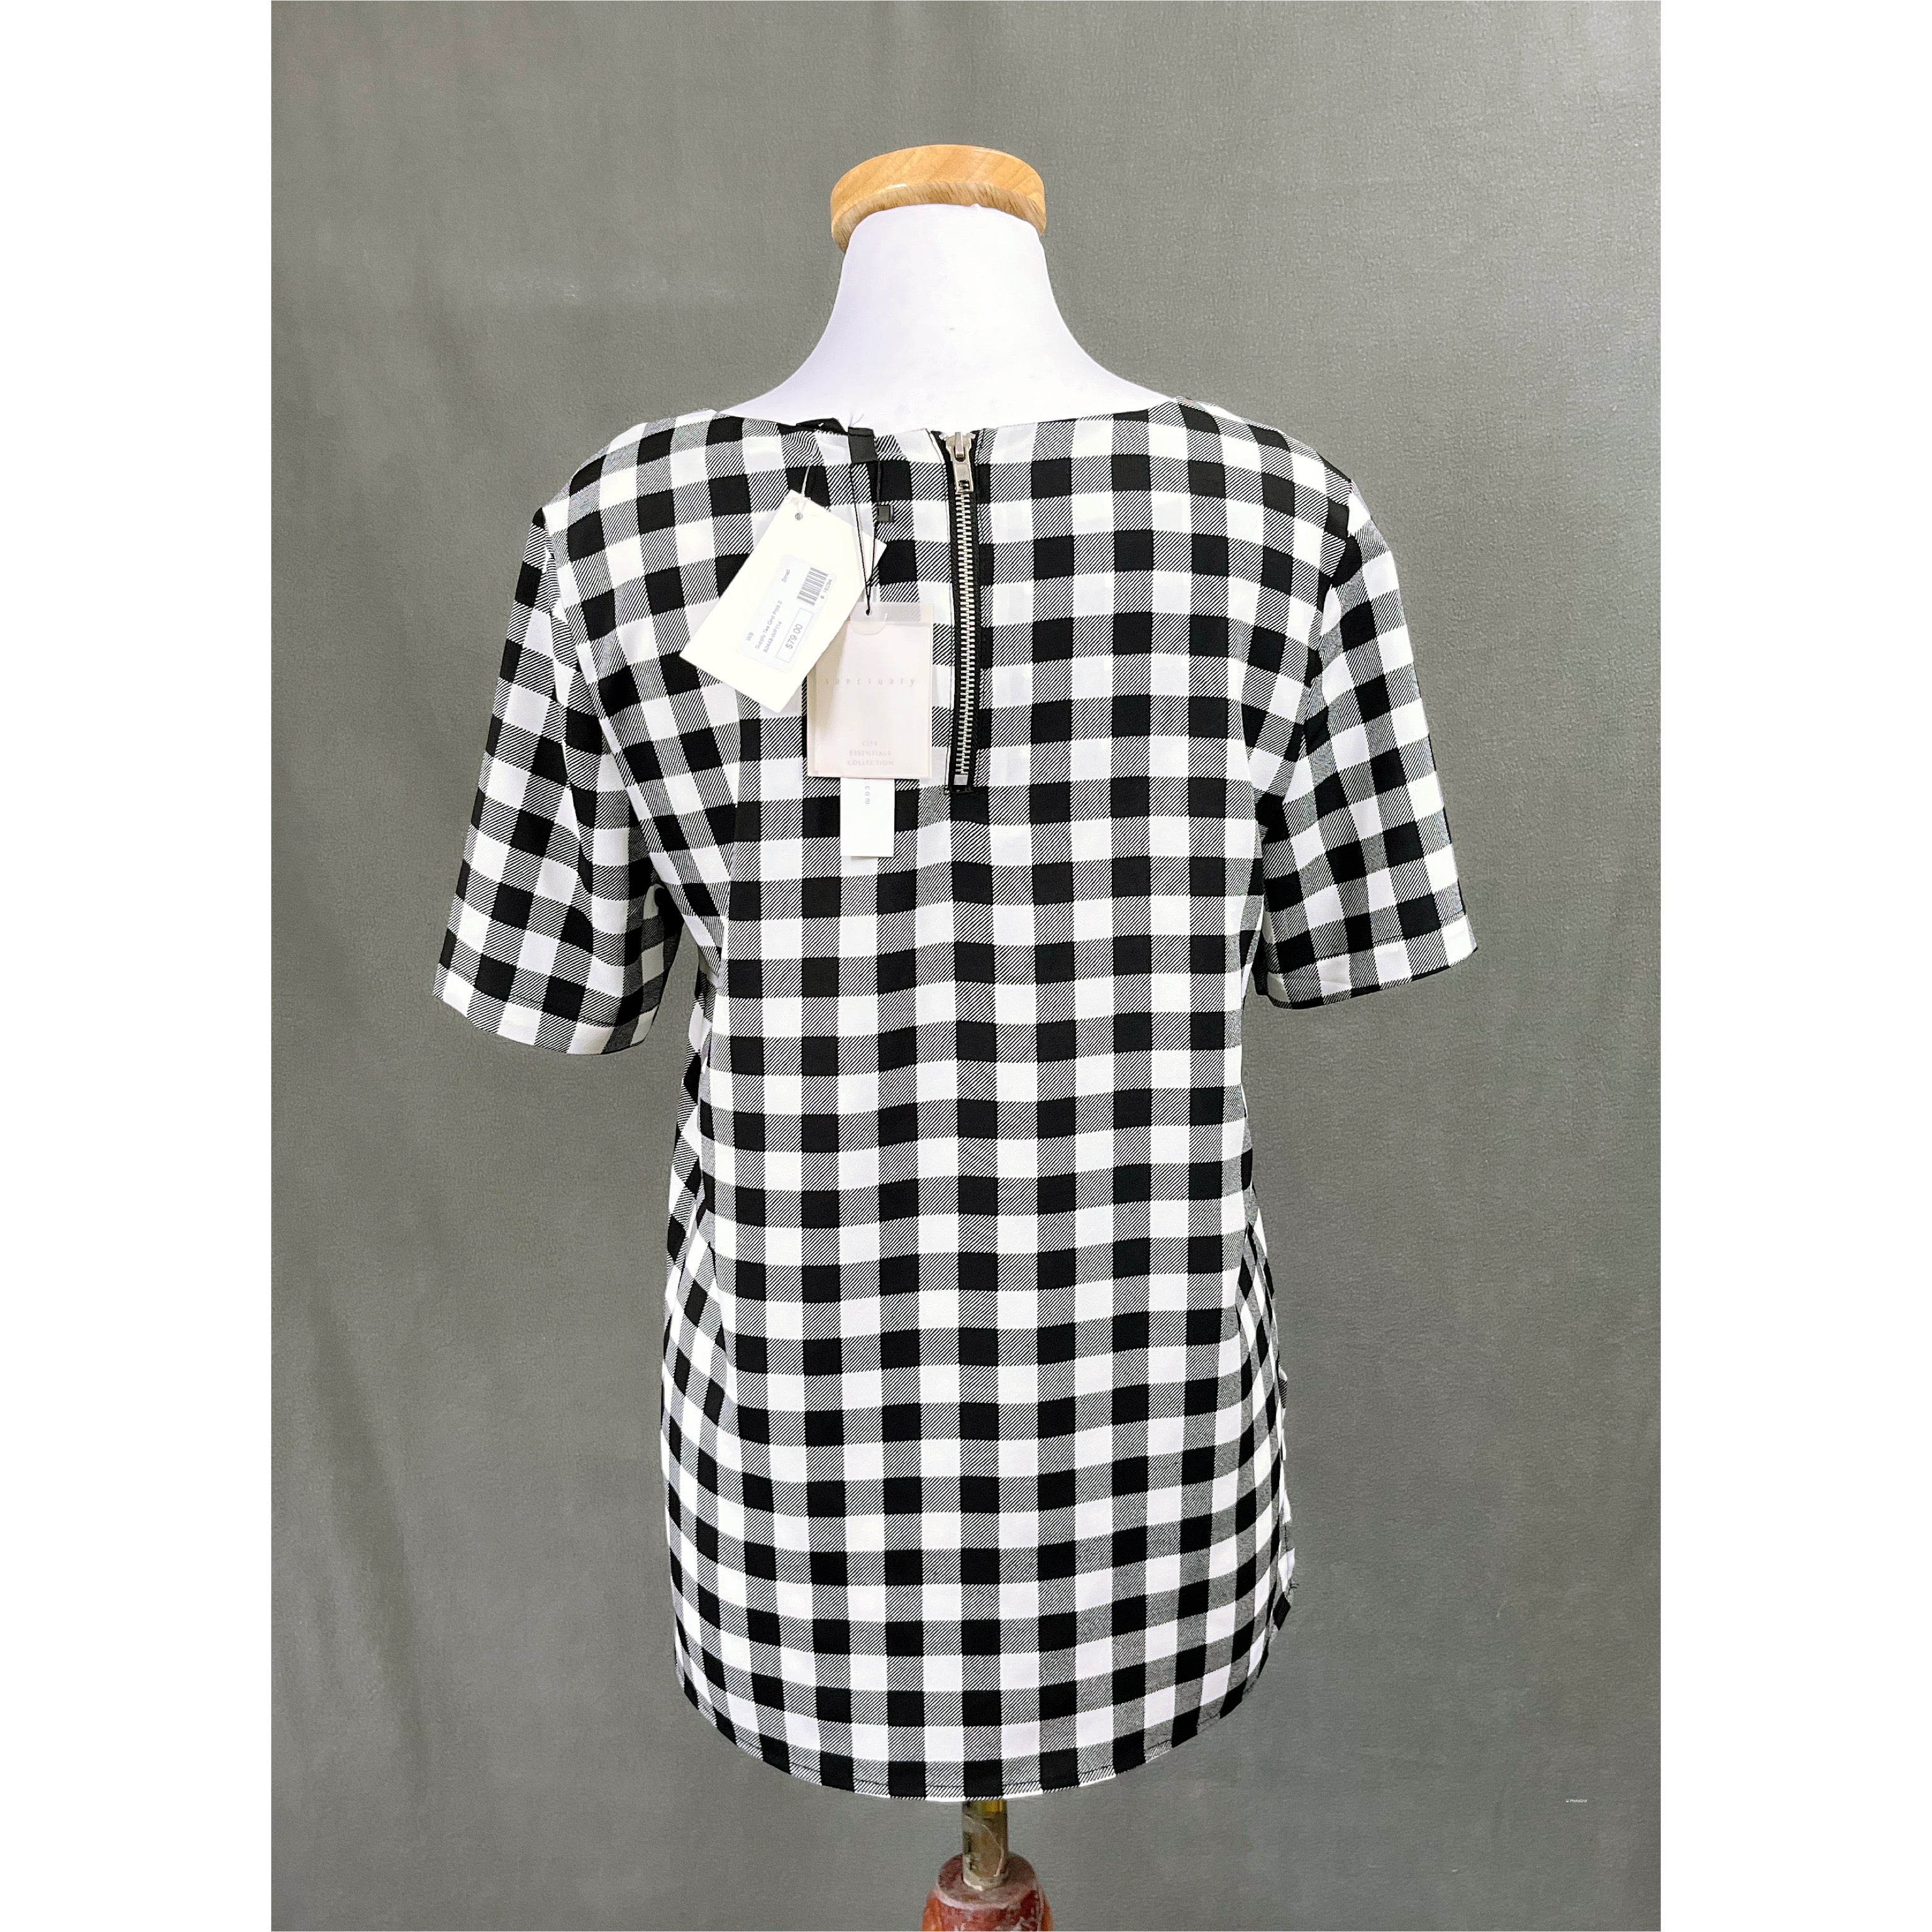 Sanctuary black & white check blouse, size S, NEW WITH TAGS!